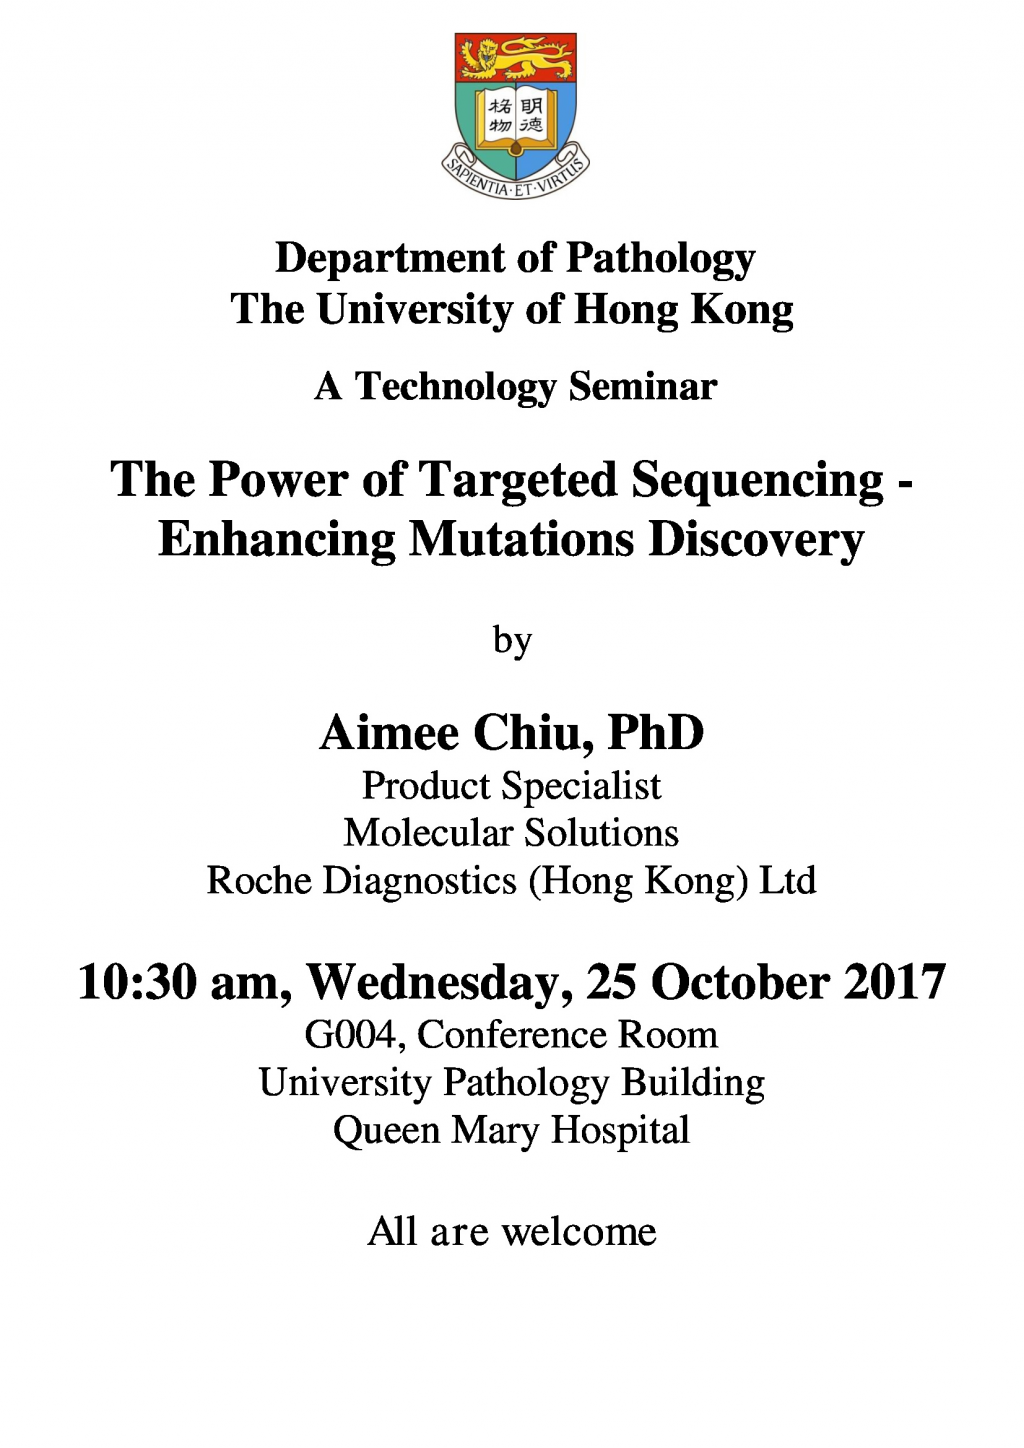 A Seminar on The Power of Targeted Sequencing - Enhancing Mutations Discovery by Dr Aimee Chiu on 25 Oct 2017 (10:30am)